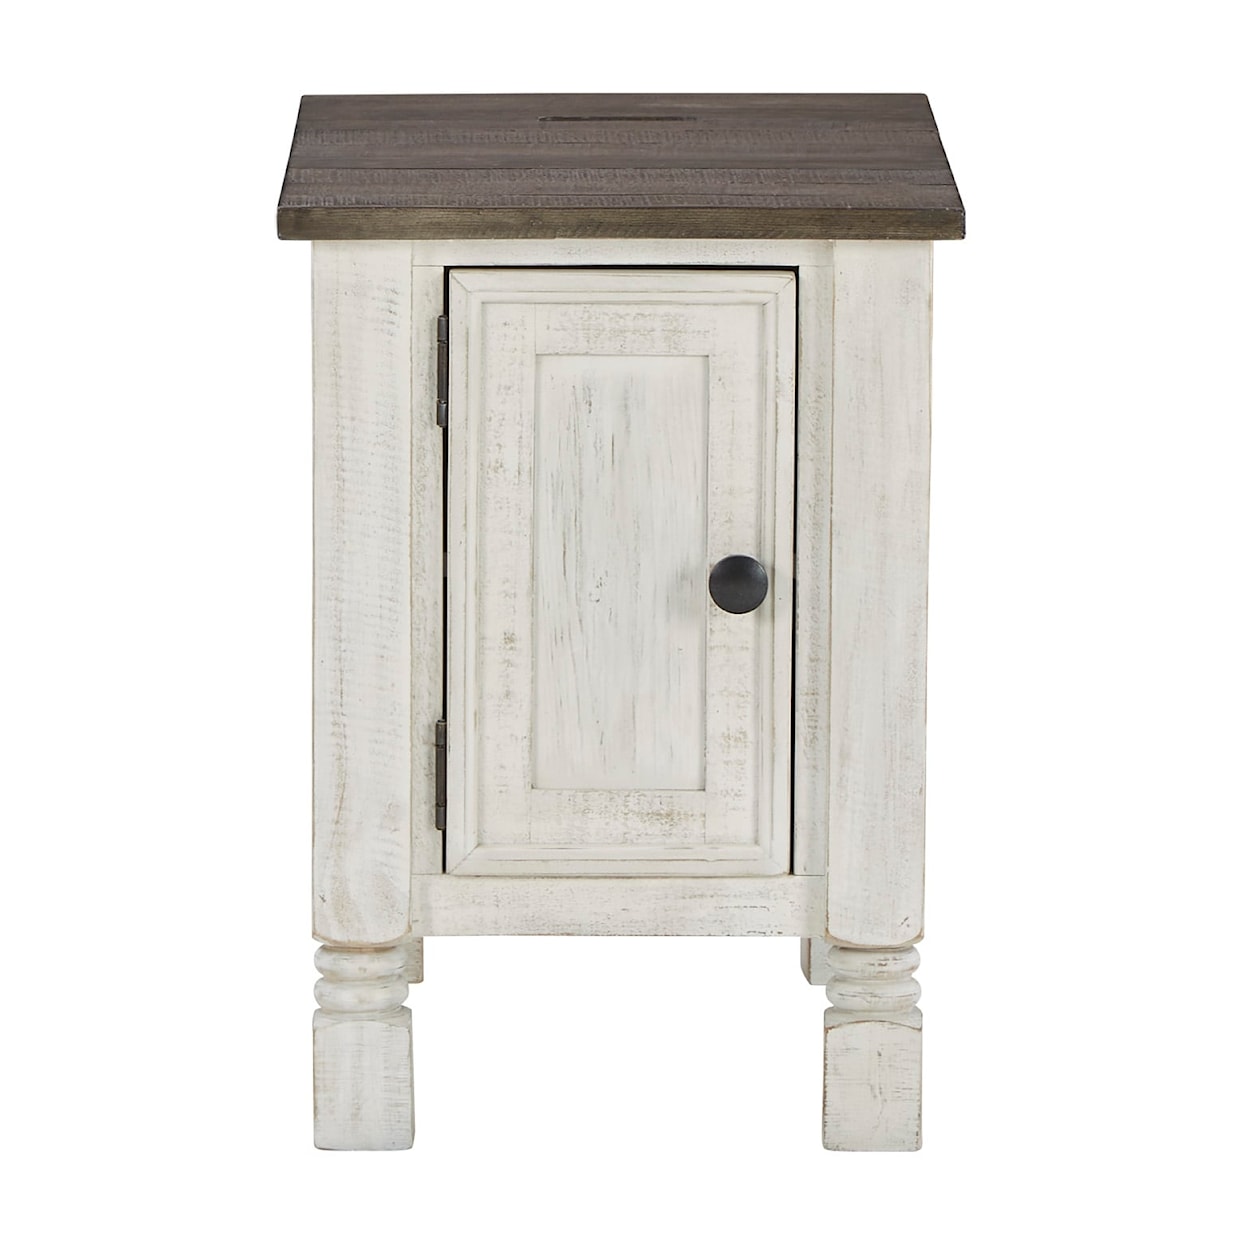 Signature Design Havalance Chairside End Table